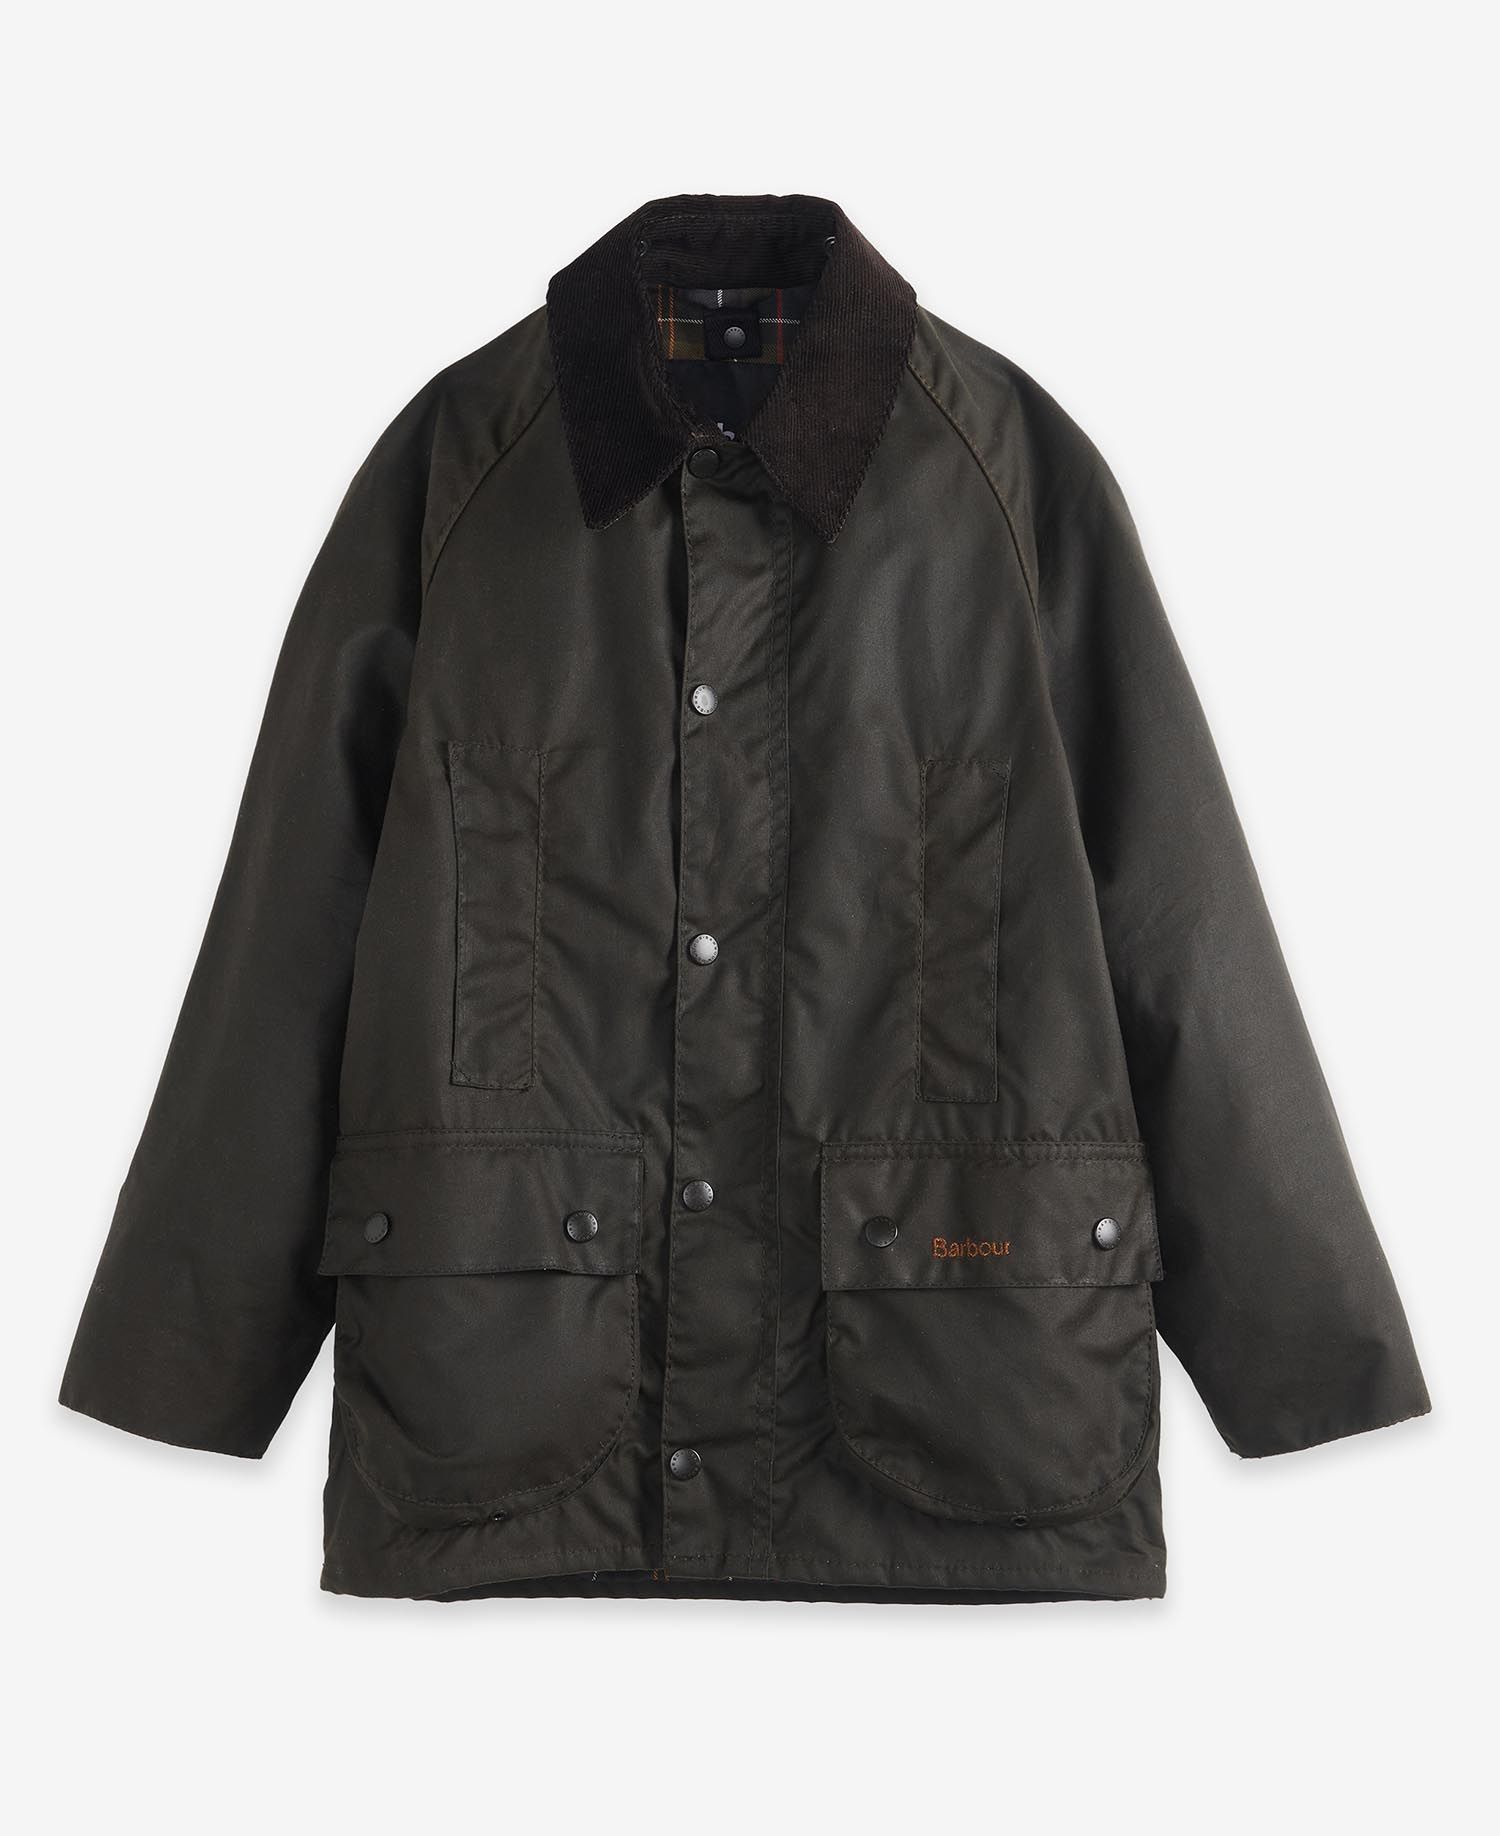 Barbour Boys Beaufort Waxed Jacket in Olive | Barbour